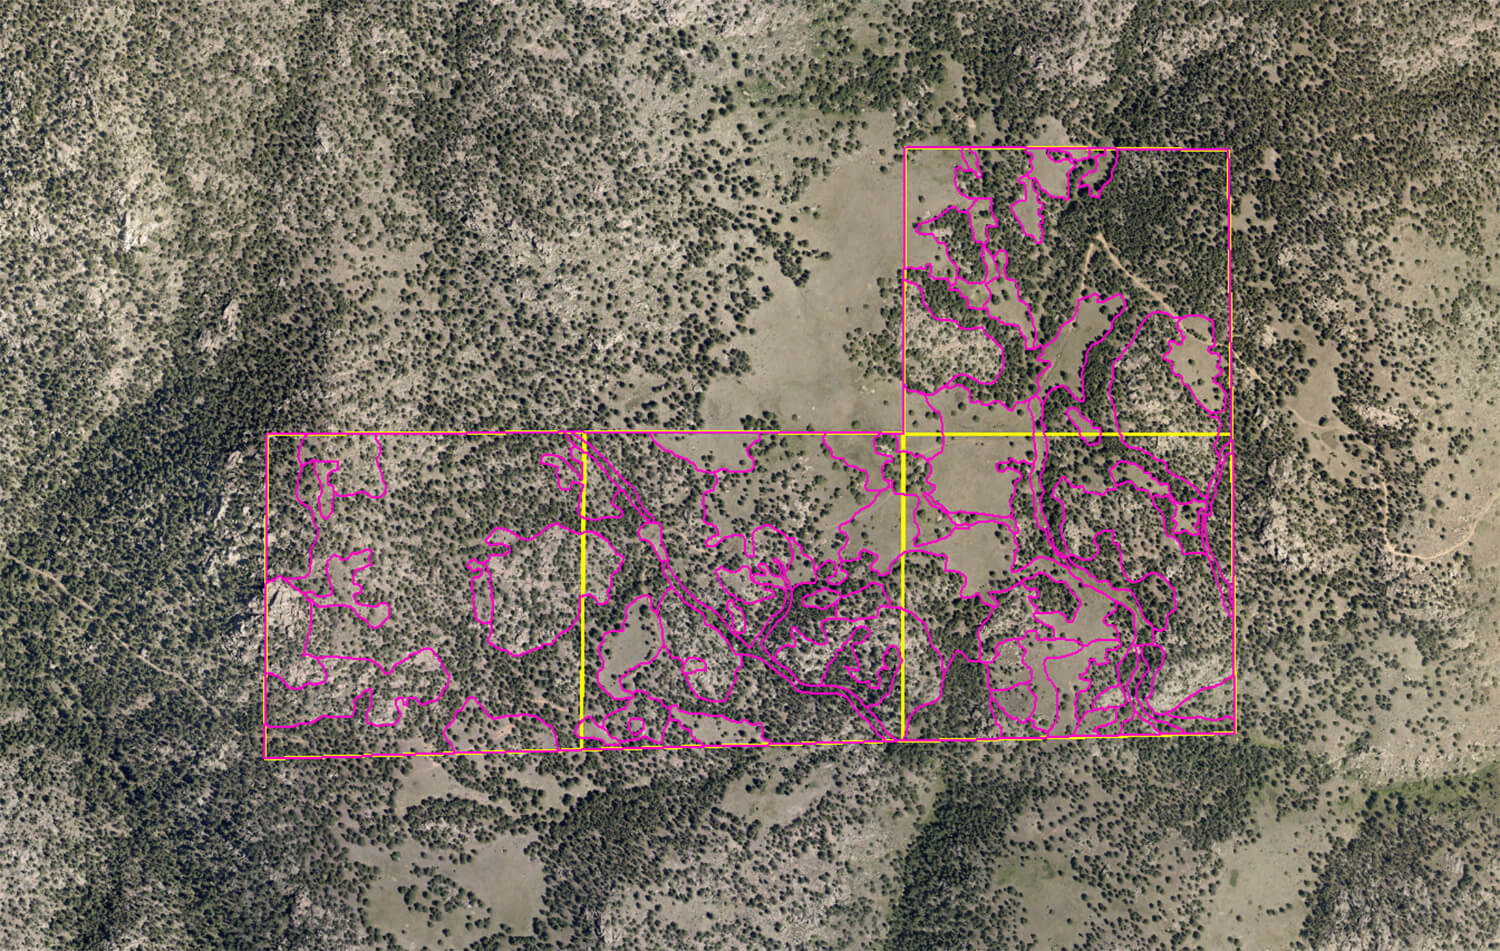 The boundaries of vegetation communities (outlined in pink) at the Billings Open Space property. This map is a result of first using aerial imagery to draw preliminary boundaries around anticipated community boundaries and then ground-truthing those boundaries in the field. Once all the post-processing is complete, this mapping will be integrated into the rest of Boulder County’s roughly 33,000 acres of existing vegetation mapping. 